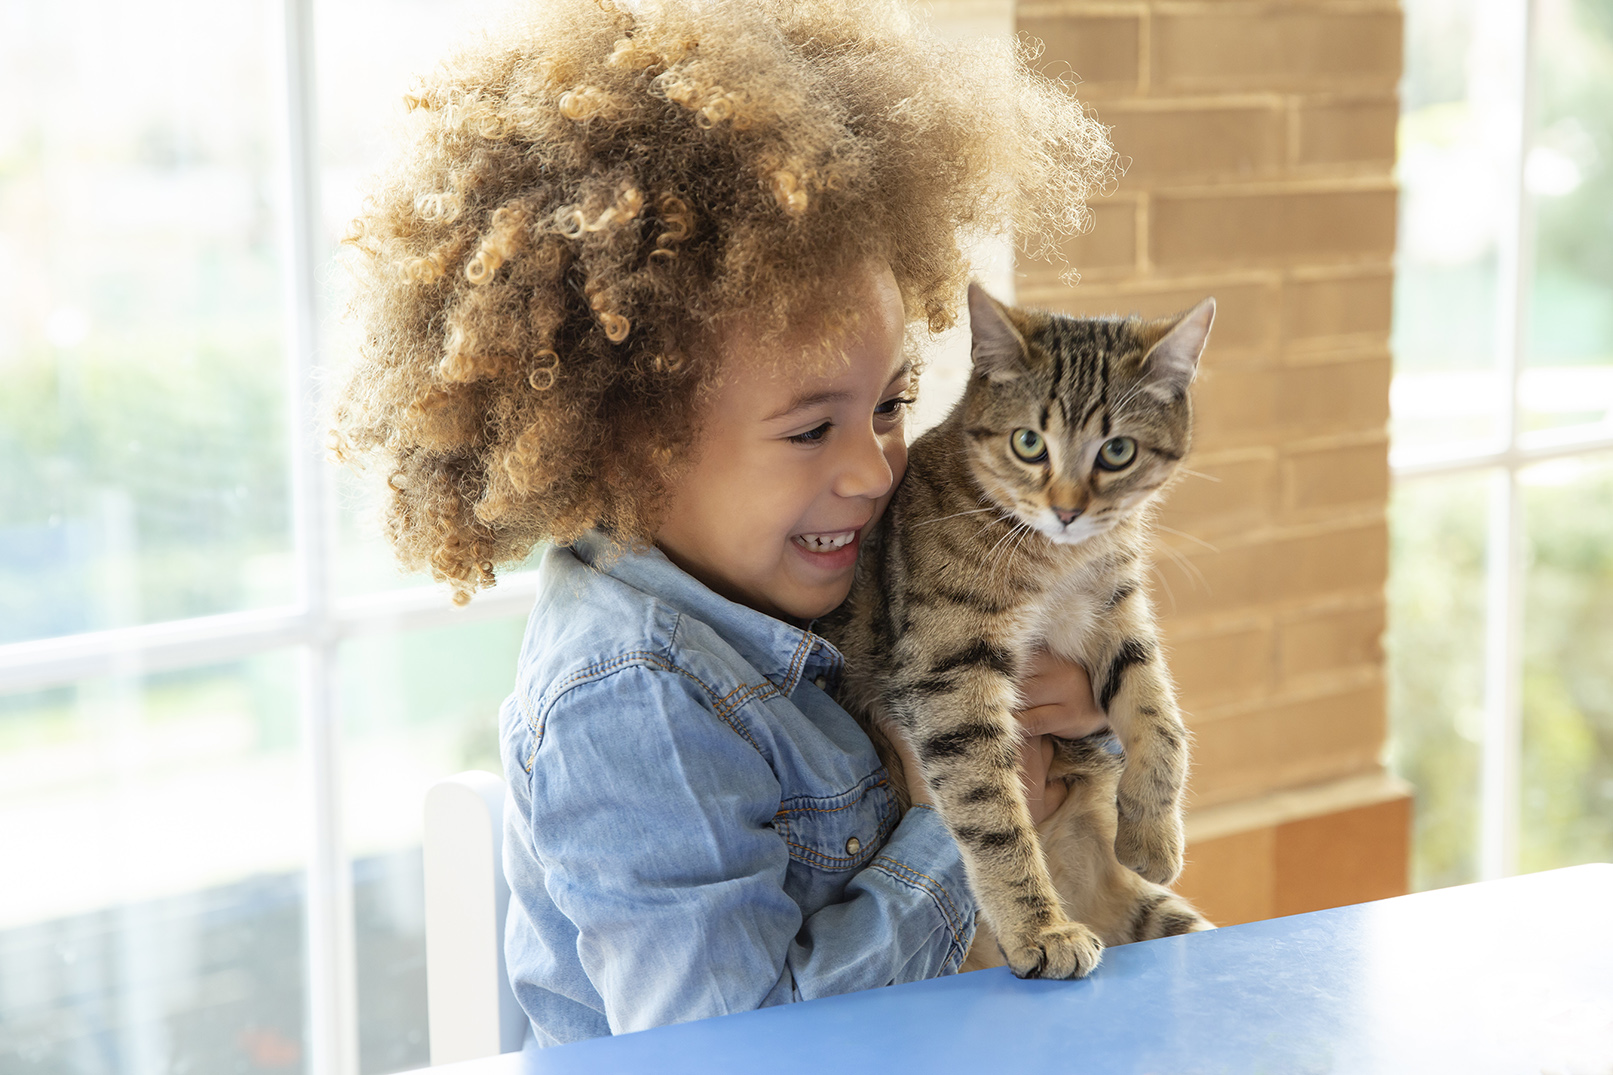 With 1 in 5 households acquiring a new pet during the pandemic, Synchrony is helping educate pet owners on options that can help make them more financially prepared for both expected and unexpected costs.